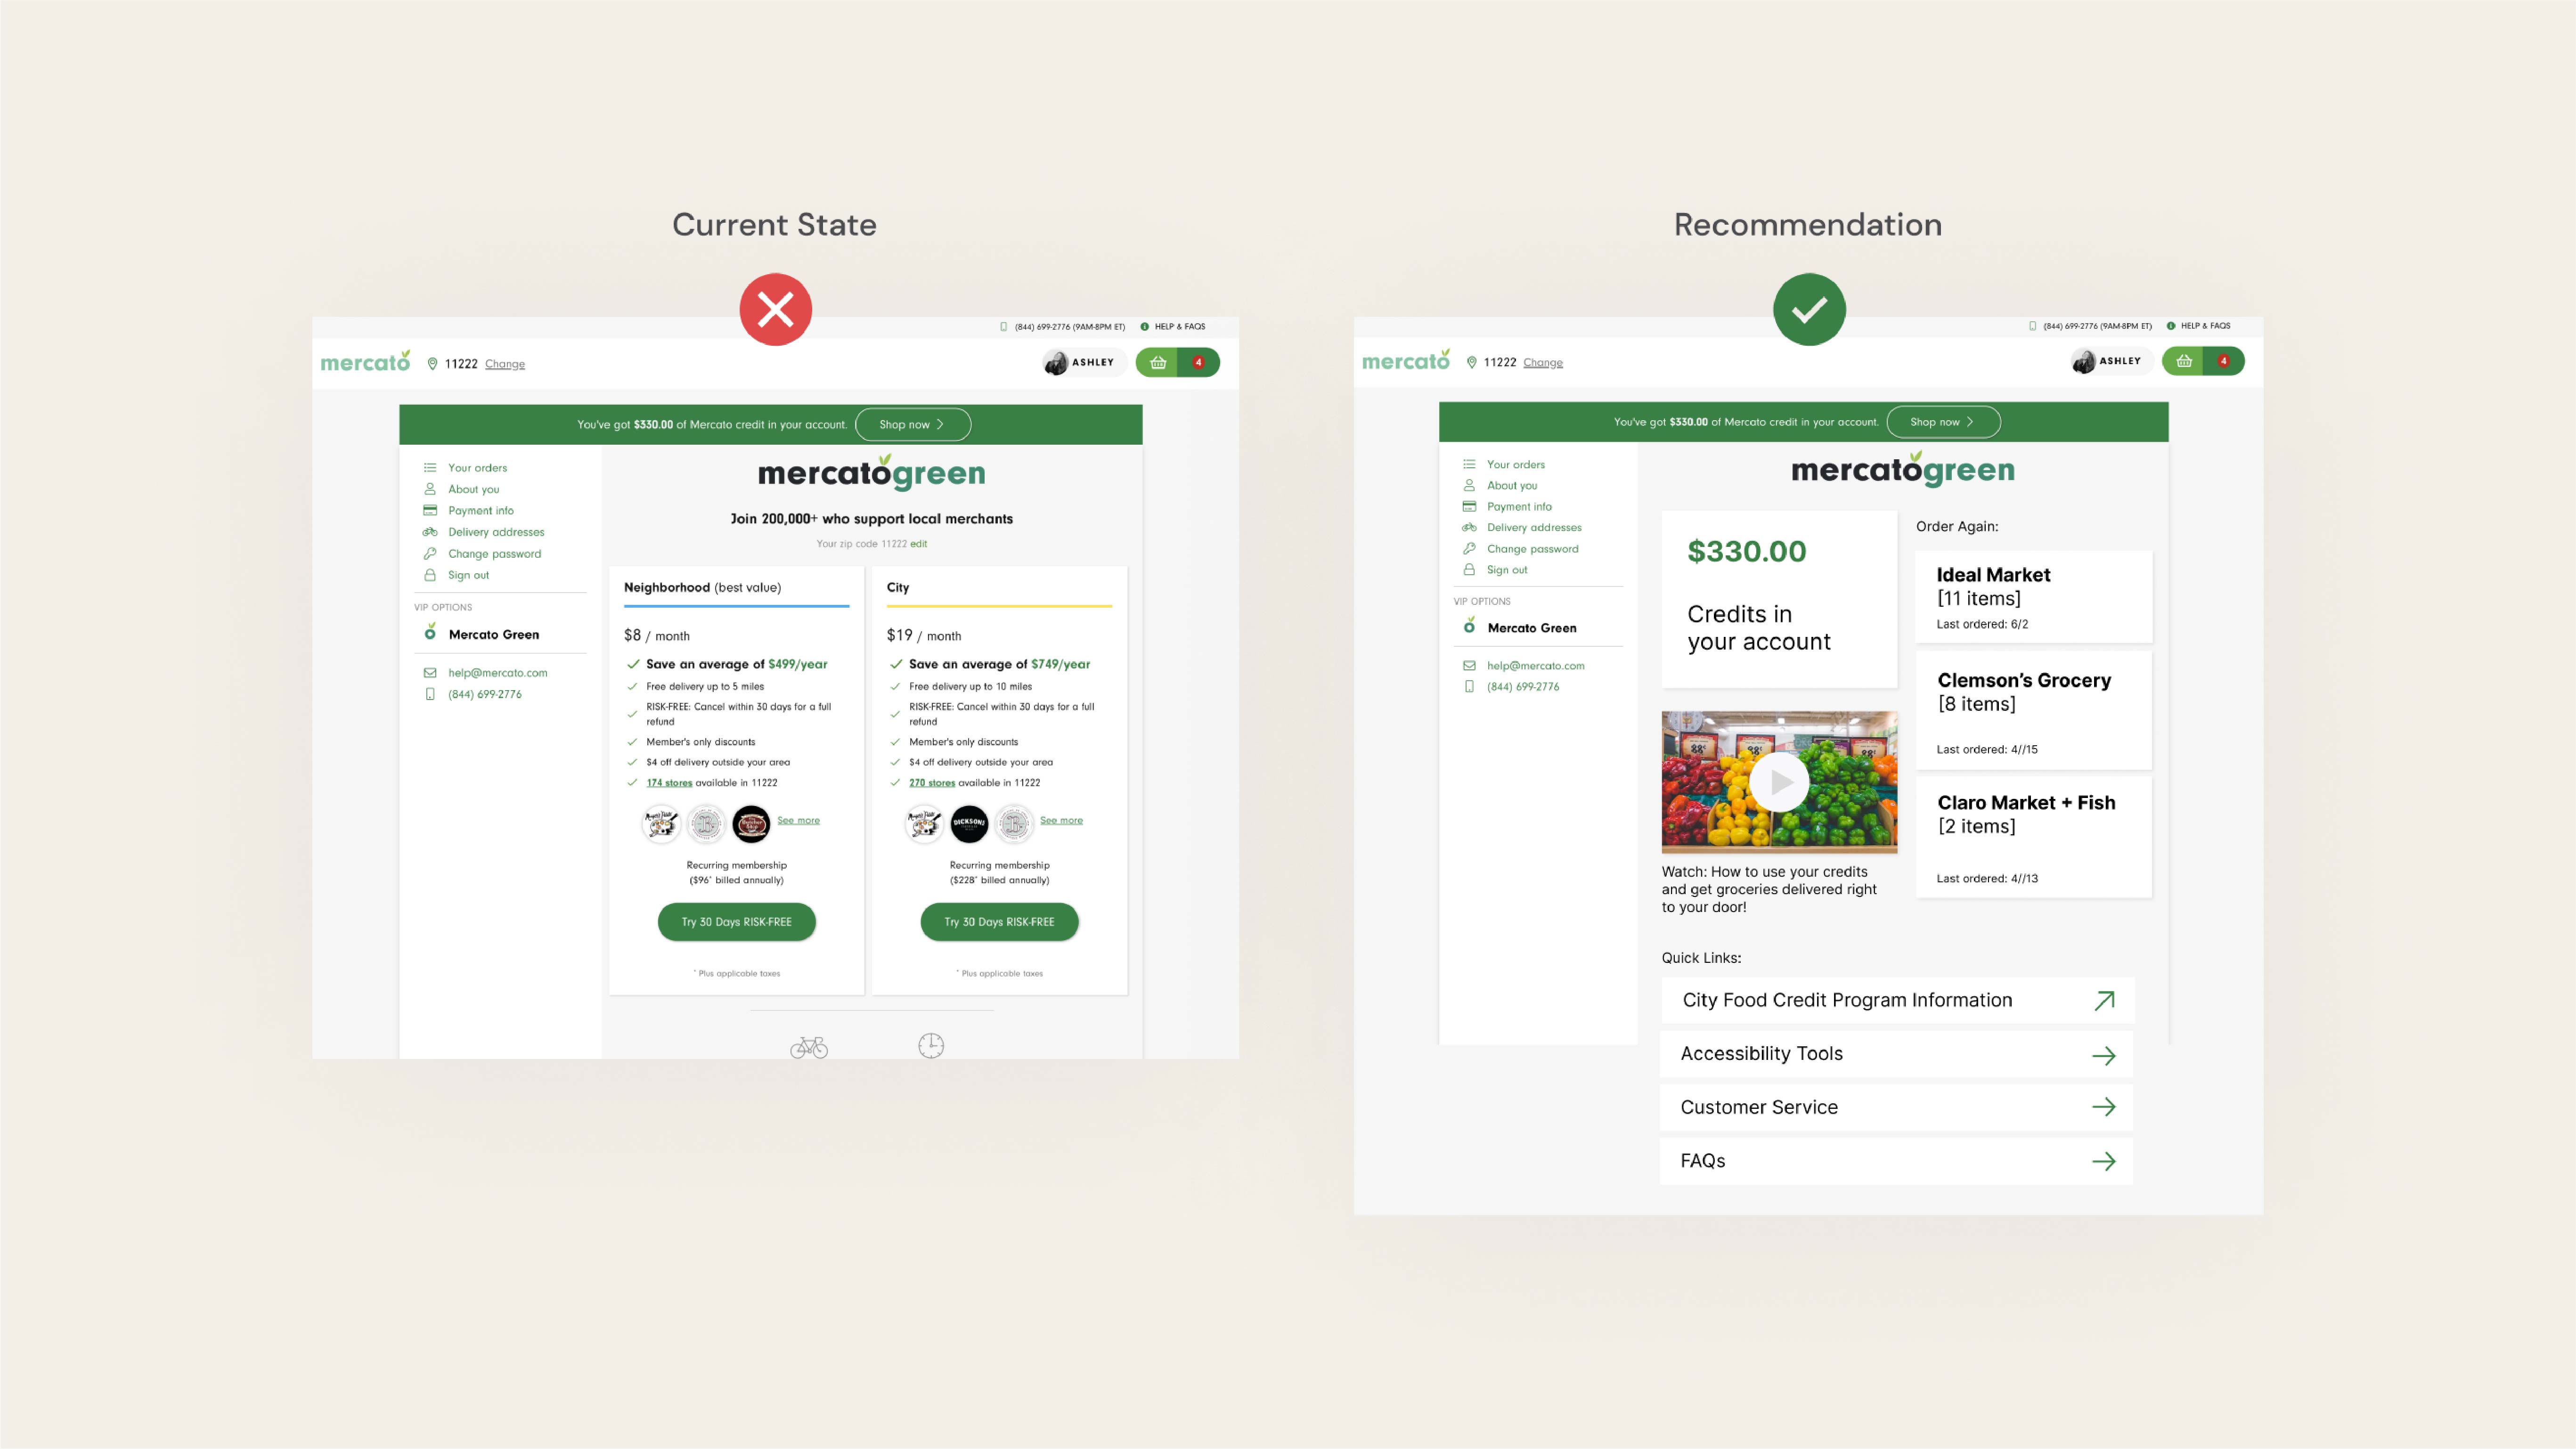 Mercato Groceries2Go website account comparison of current and recommended design layouts